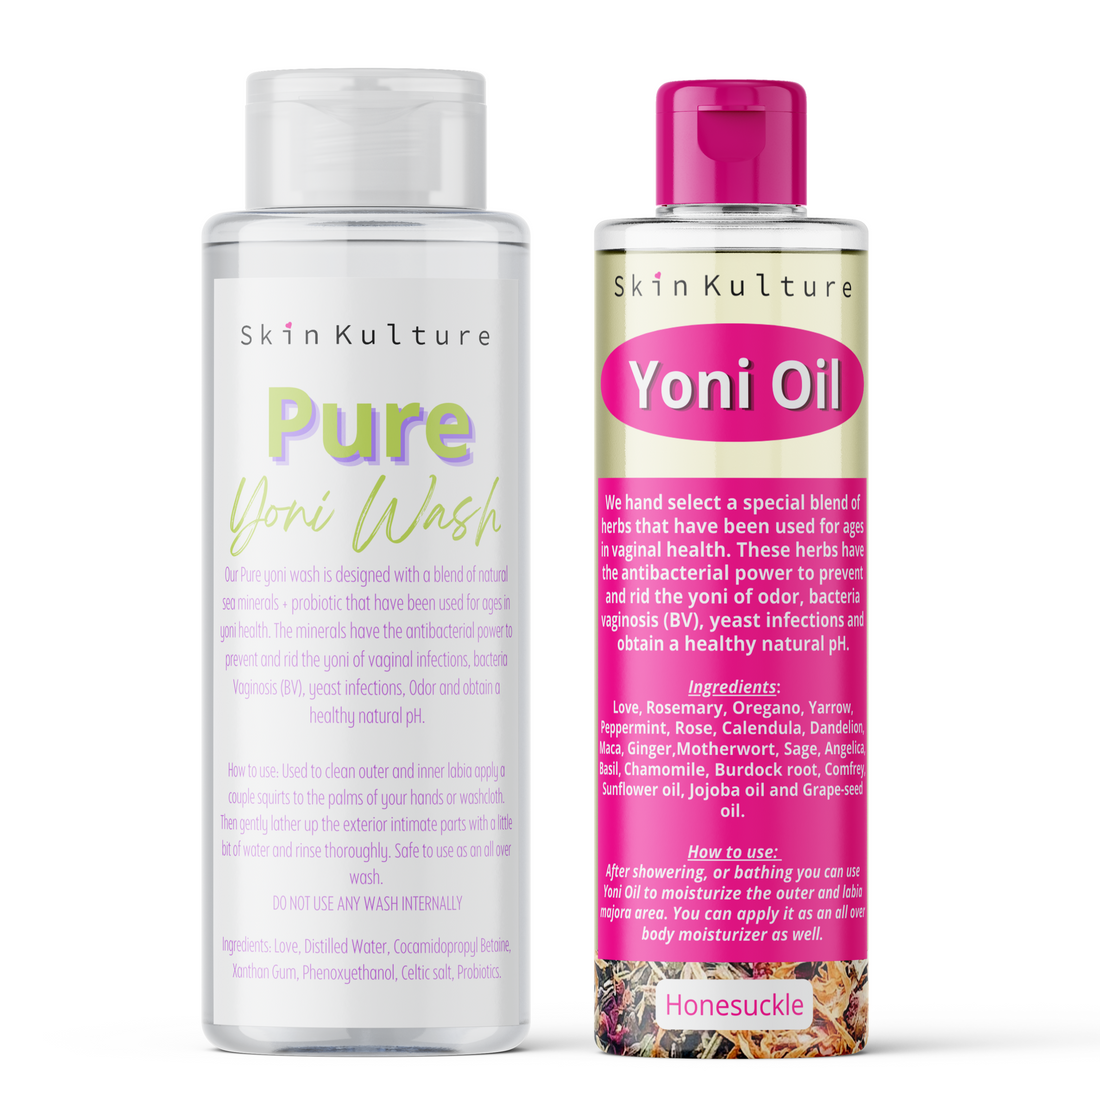 use carefully 😩#yonioil #naturalskincareproducts #yoniproducts #yoni , body  juice oil